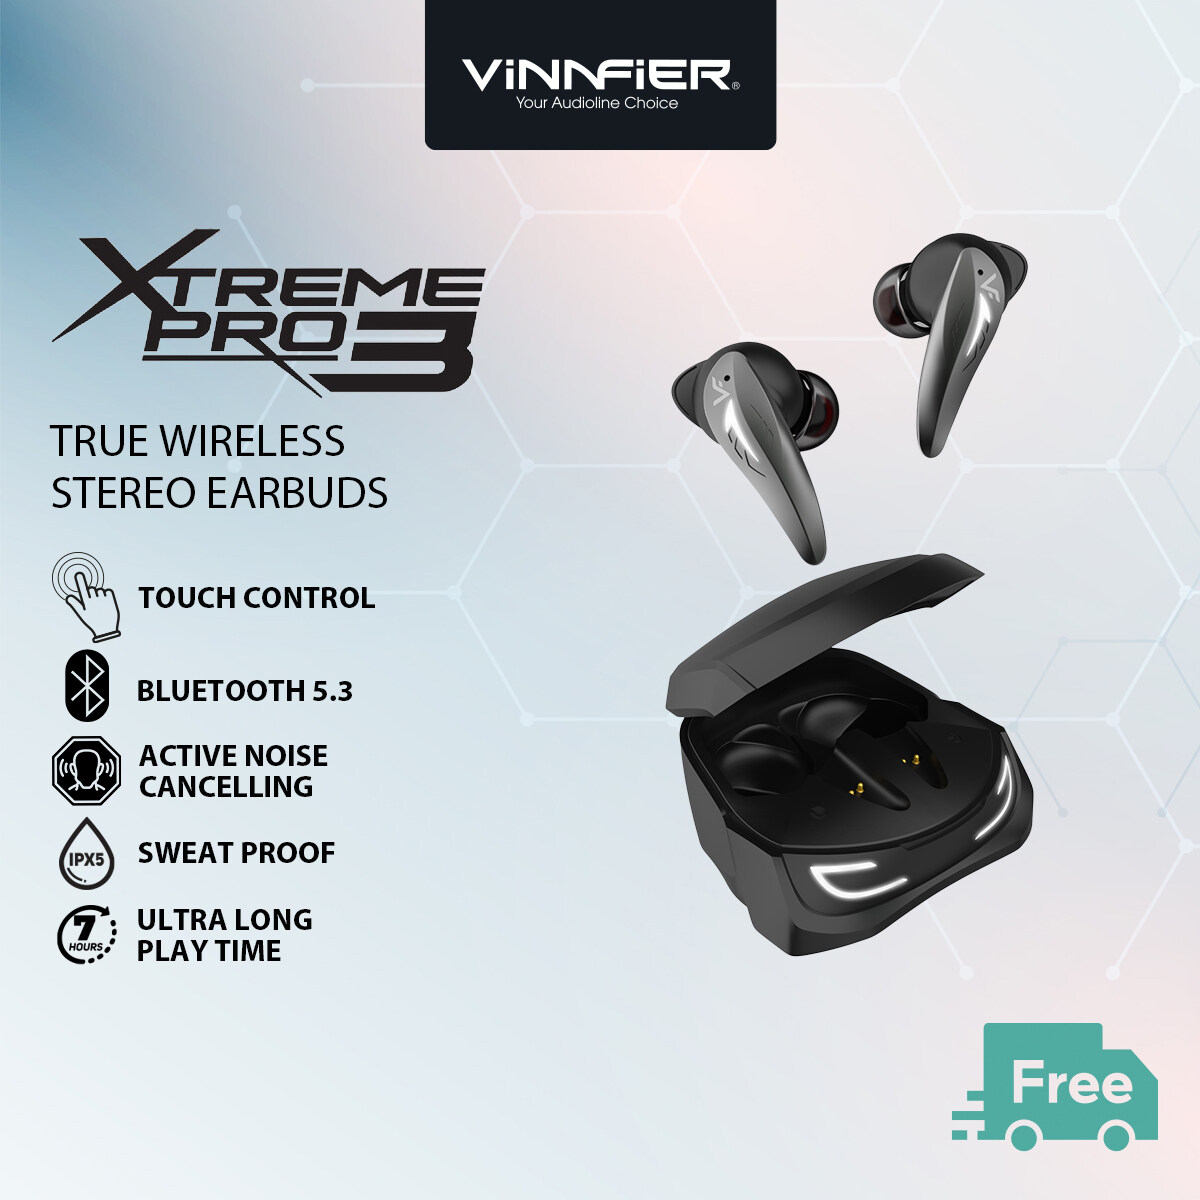 Vinnfier Xtreme Pro 3 True Wireless Gaming Low Latency Double Mic Environmental Active Noice Cancellation Mobile App